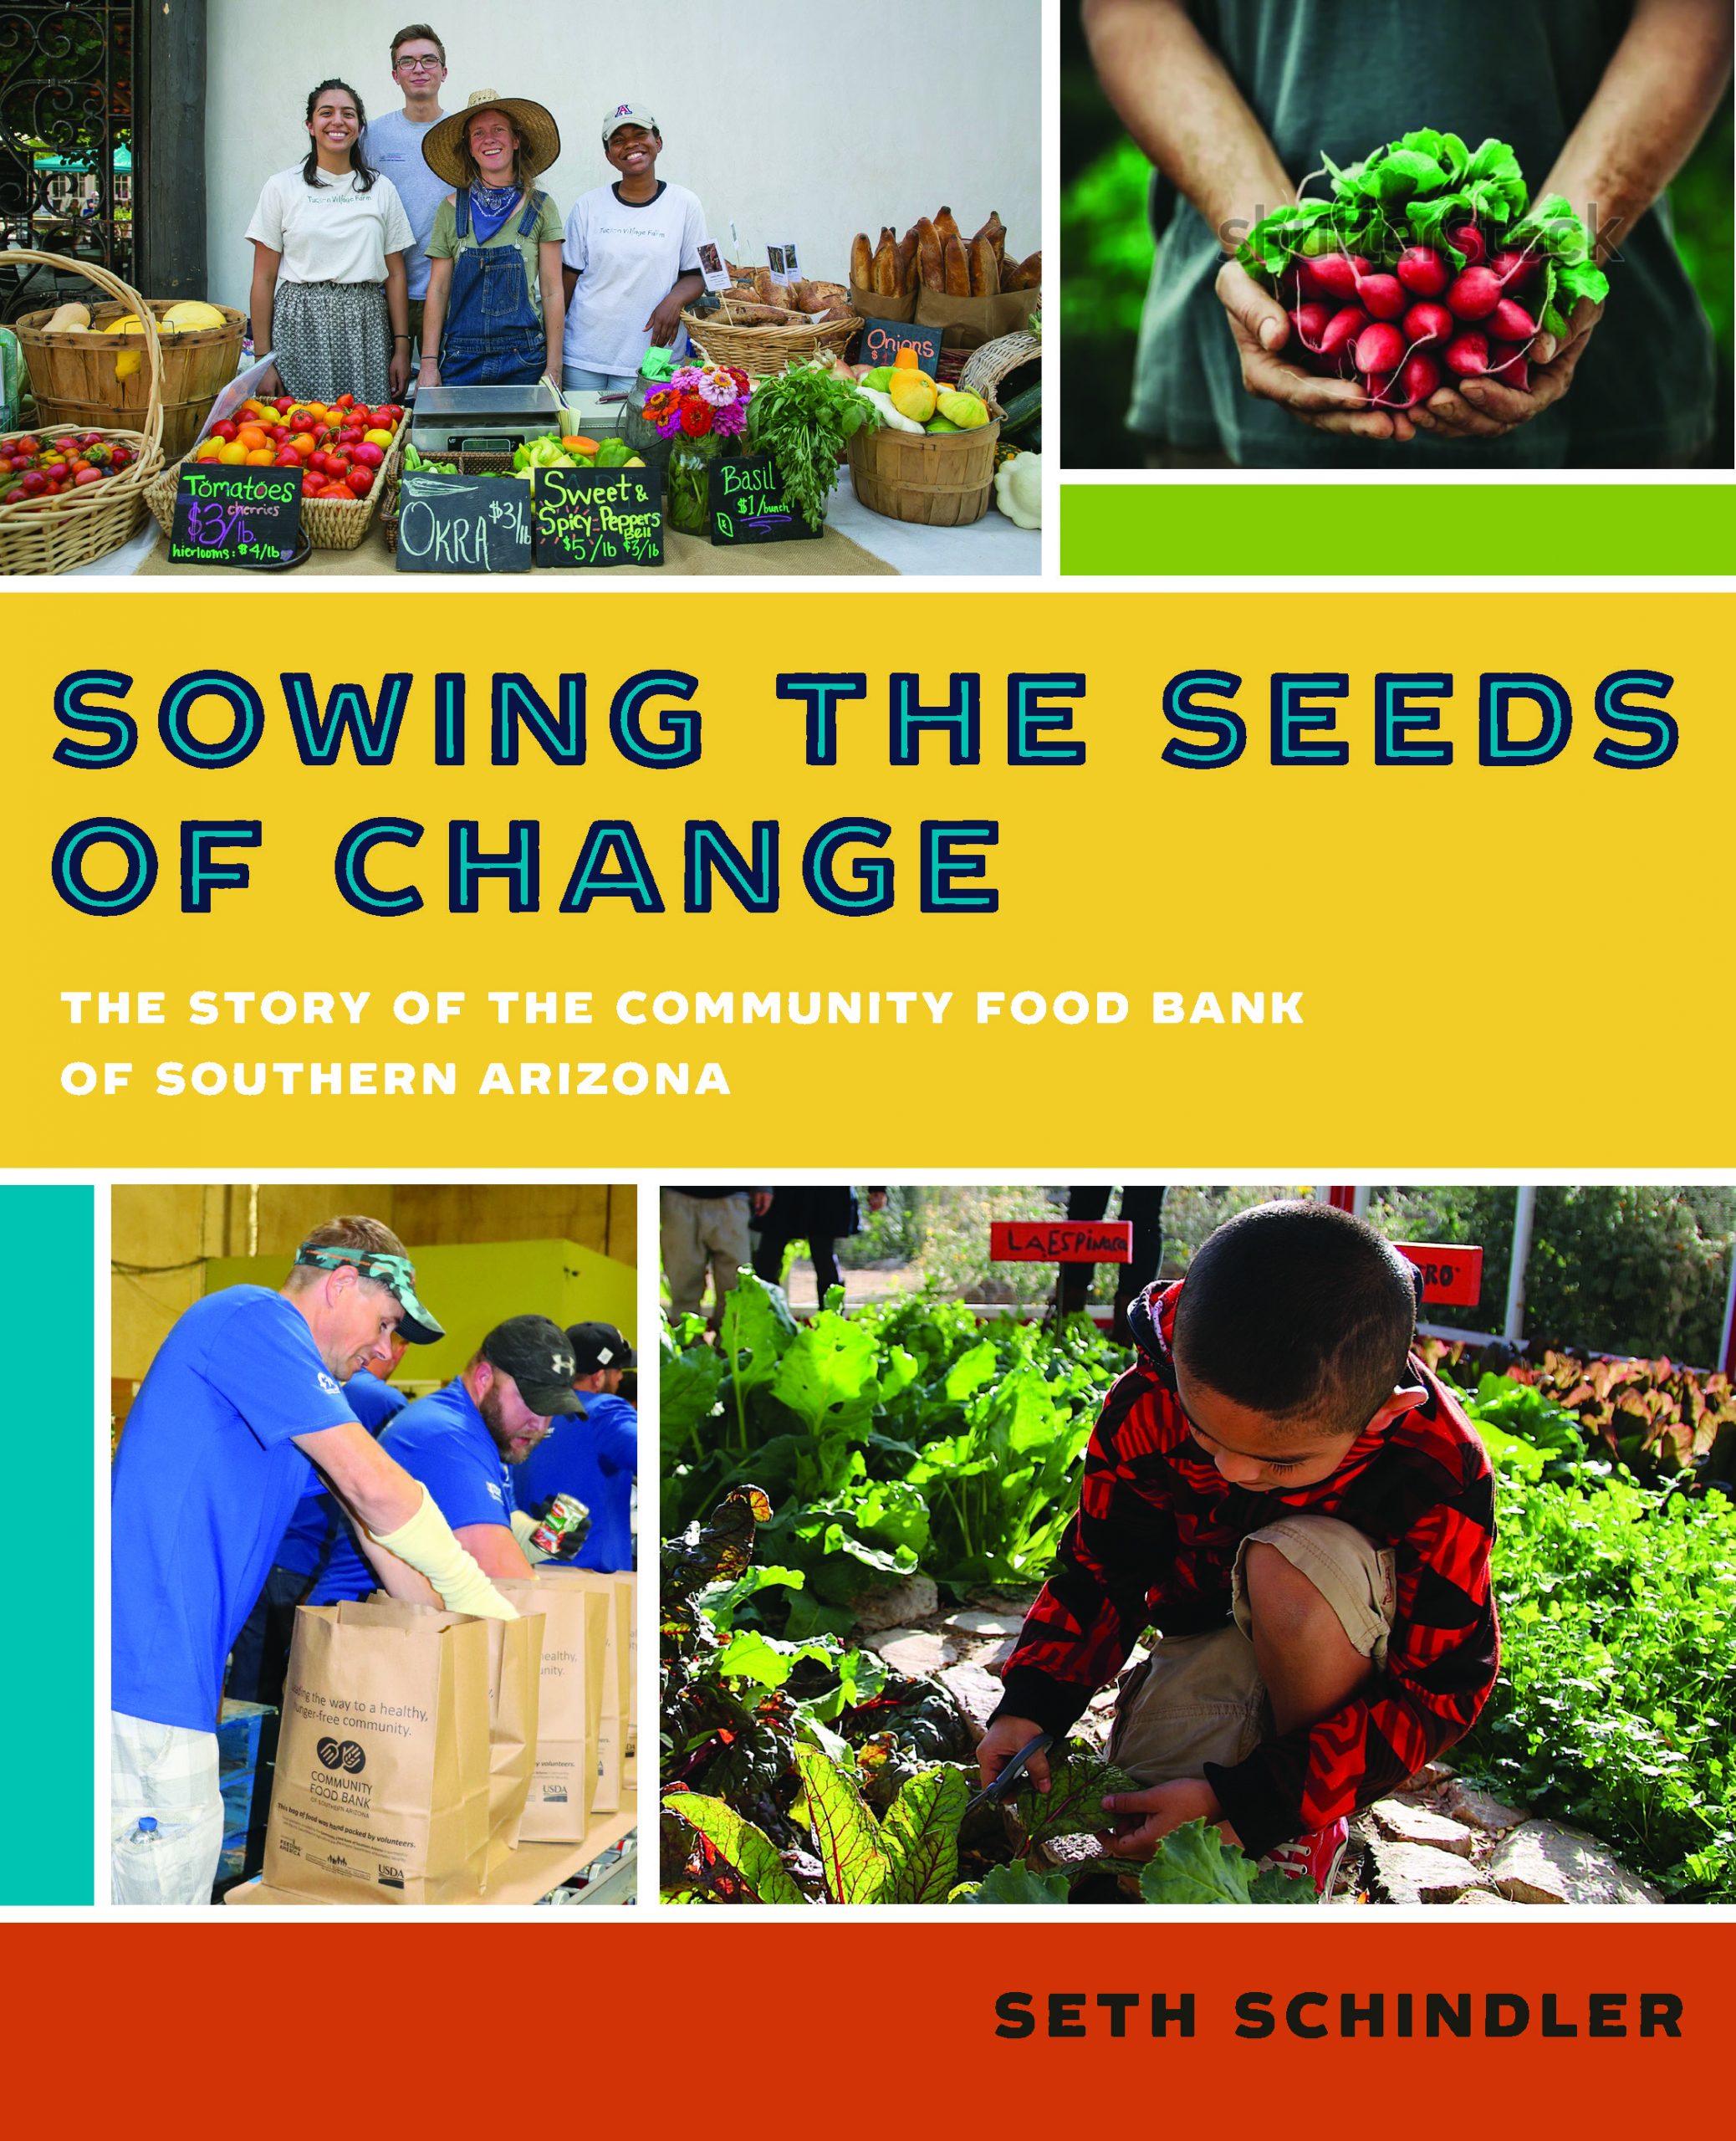 Sowing the Seeds of Change book signing at Barnes & Noble Foothills